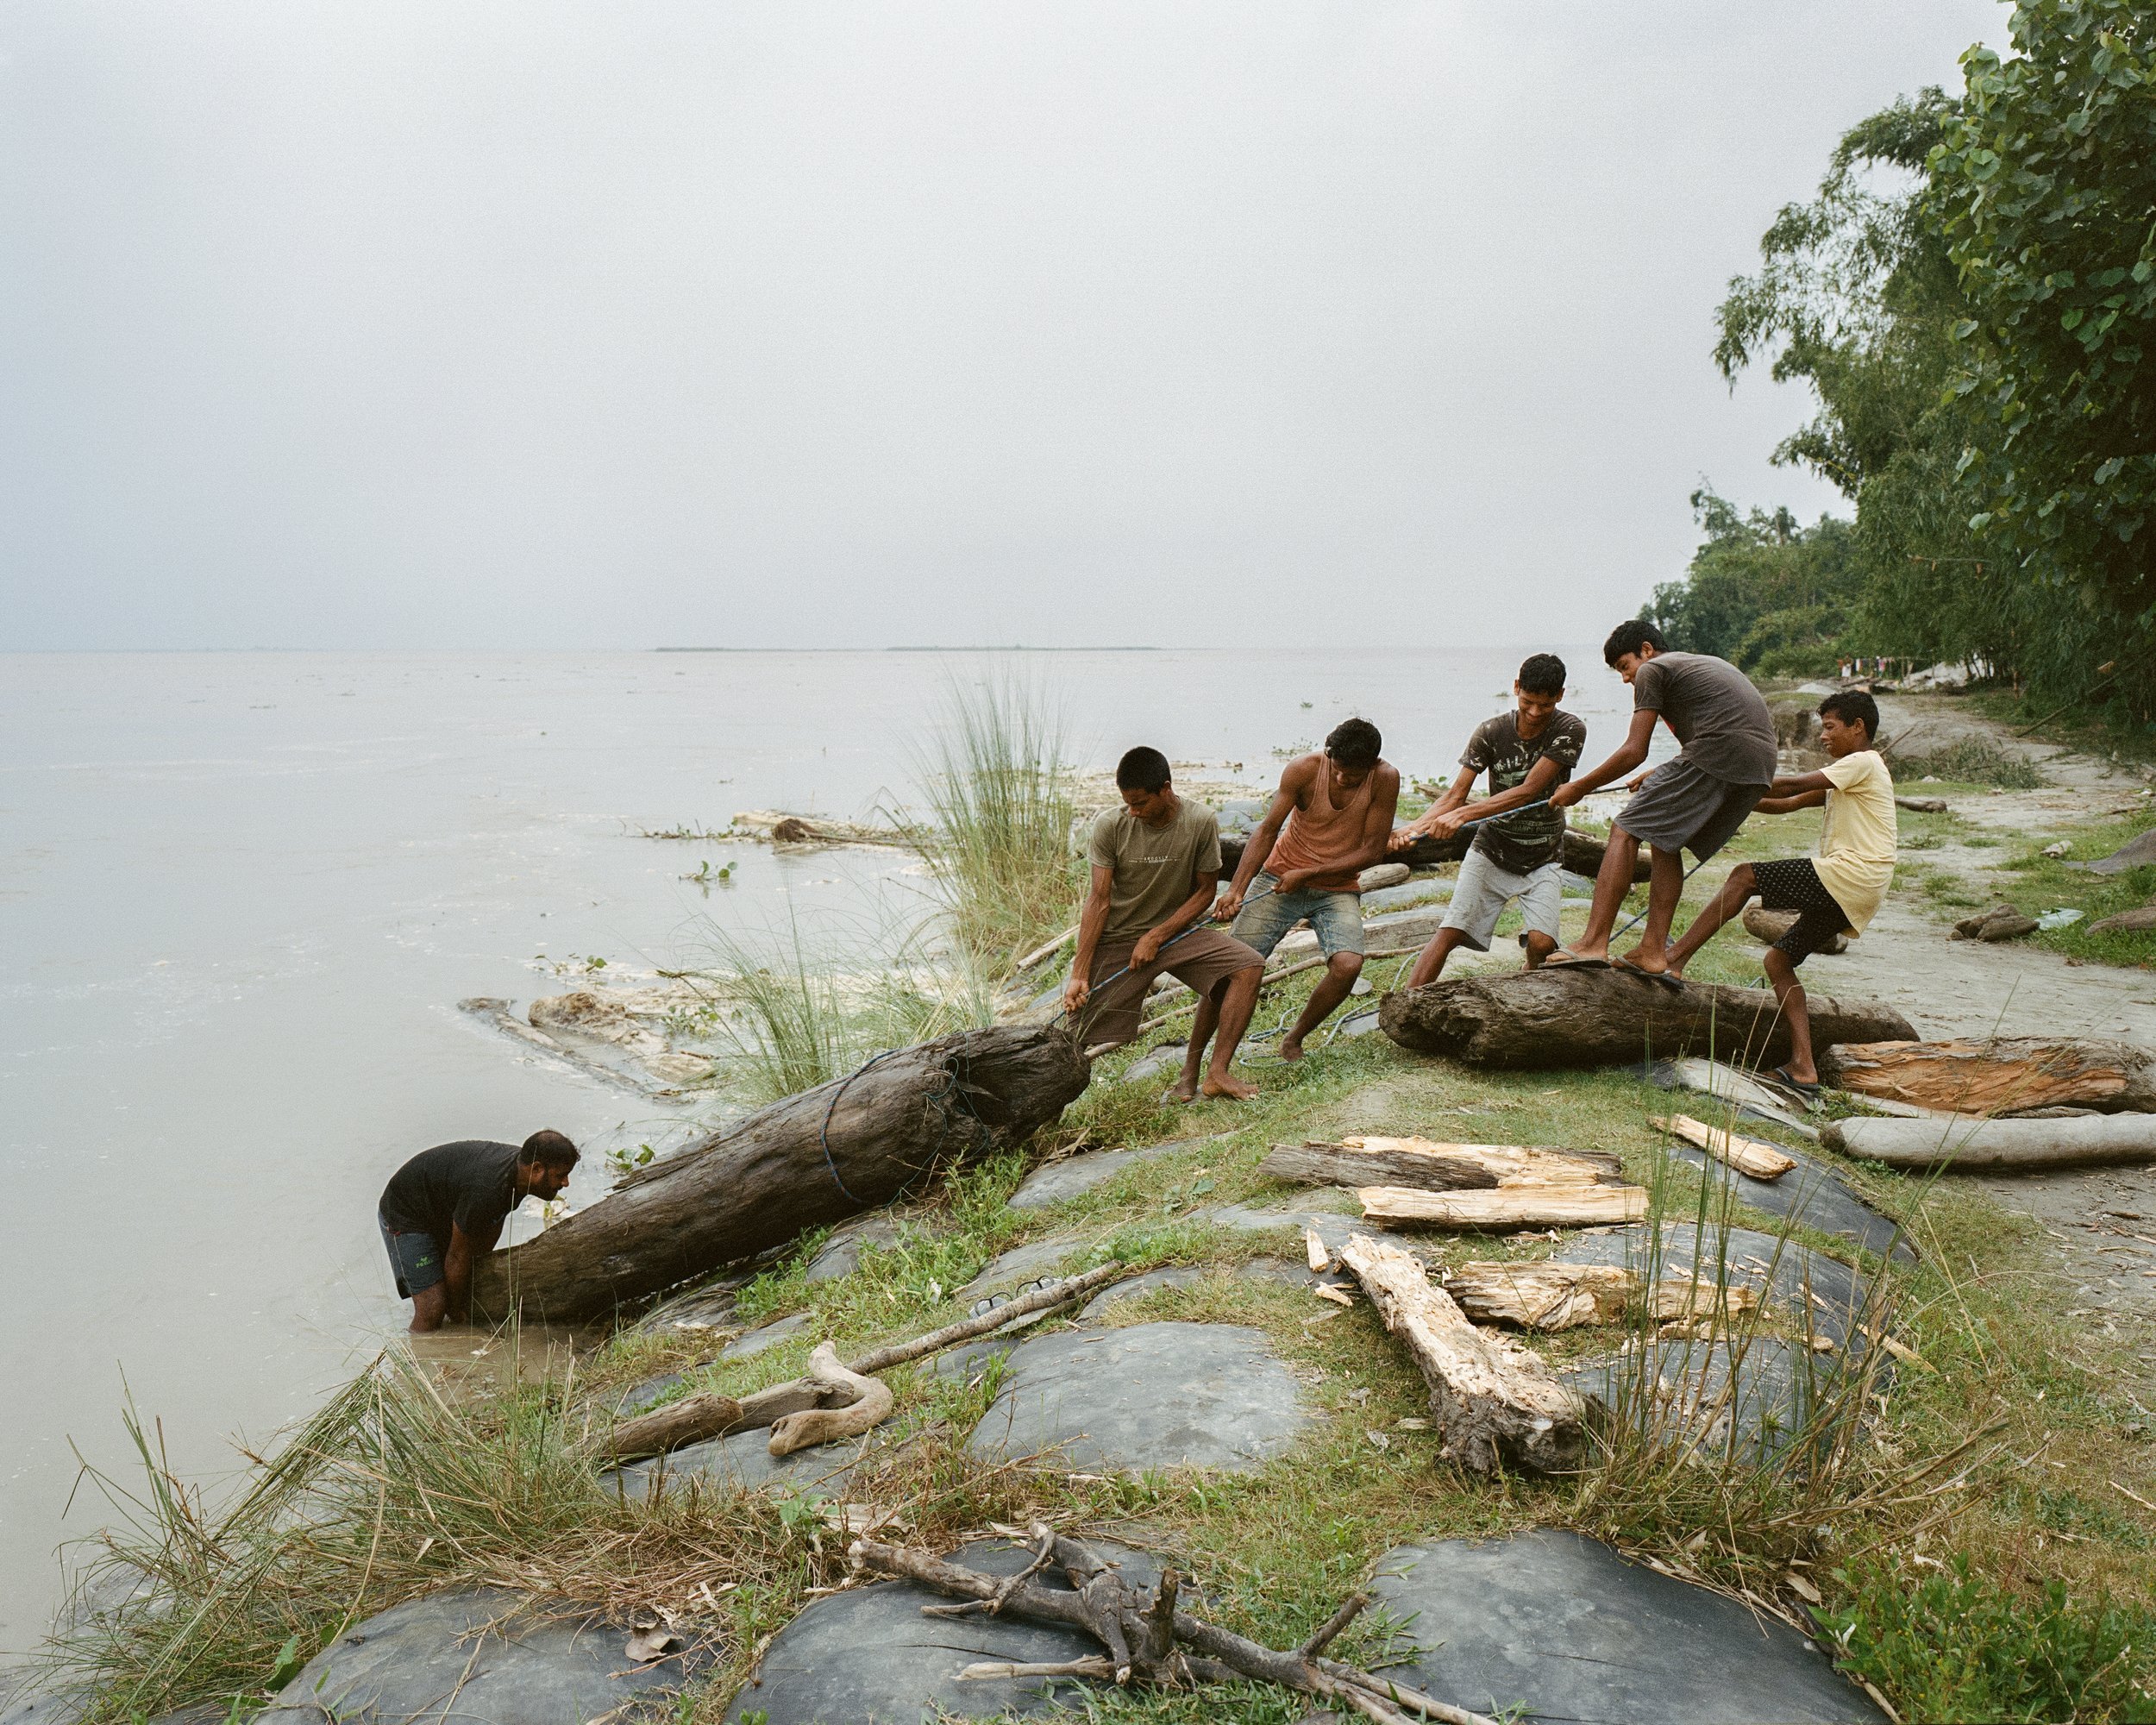   The only income during the monsoon season is to catch huge logs that can be sold later on. Villagers helping to pull out a hundreds of kgs piece from the Brahmaputra. After drying and chopping them they can sell for a decent price.    Ahato Guri, M